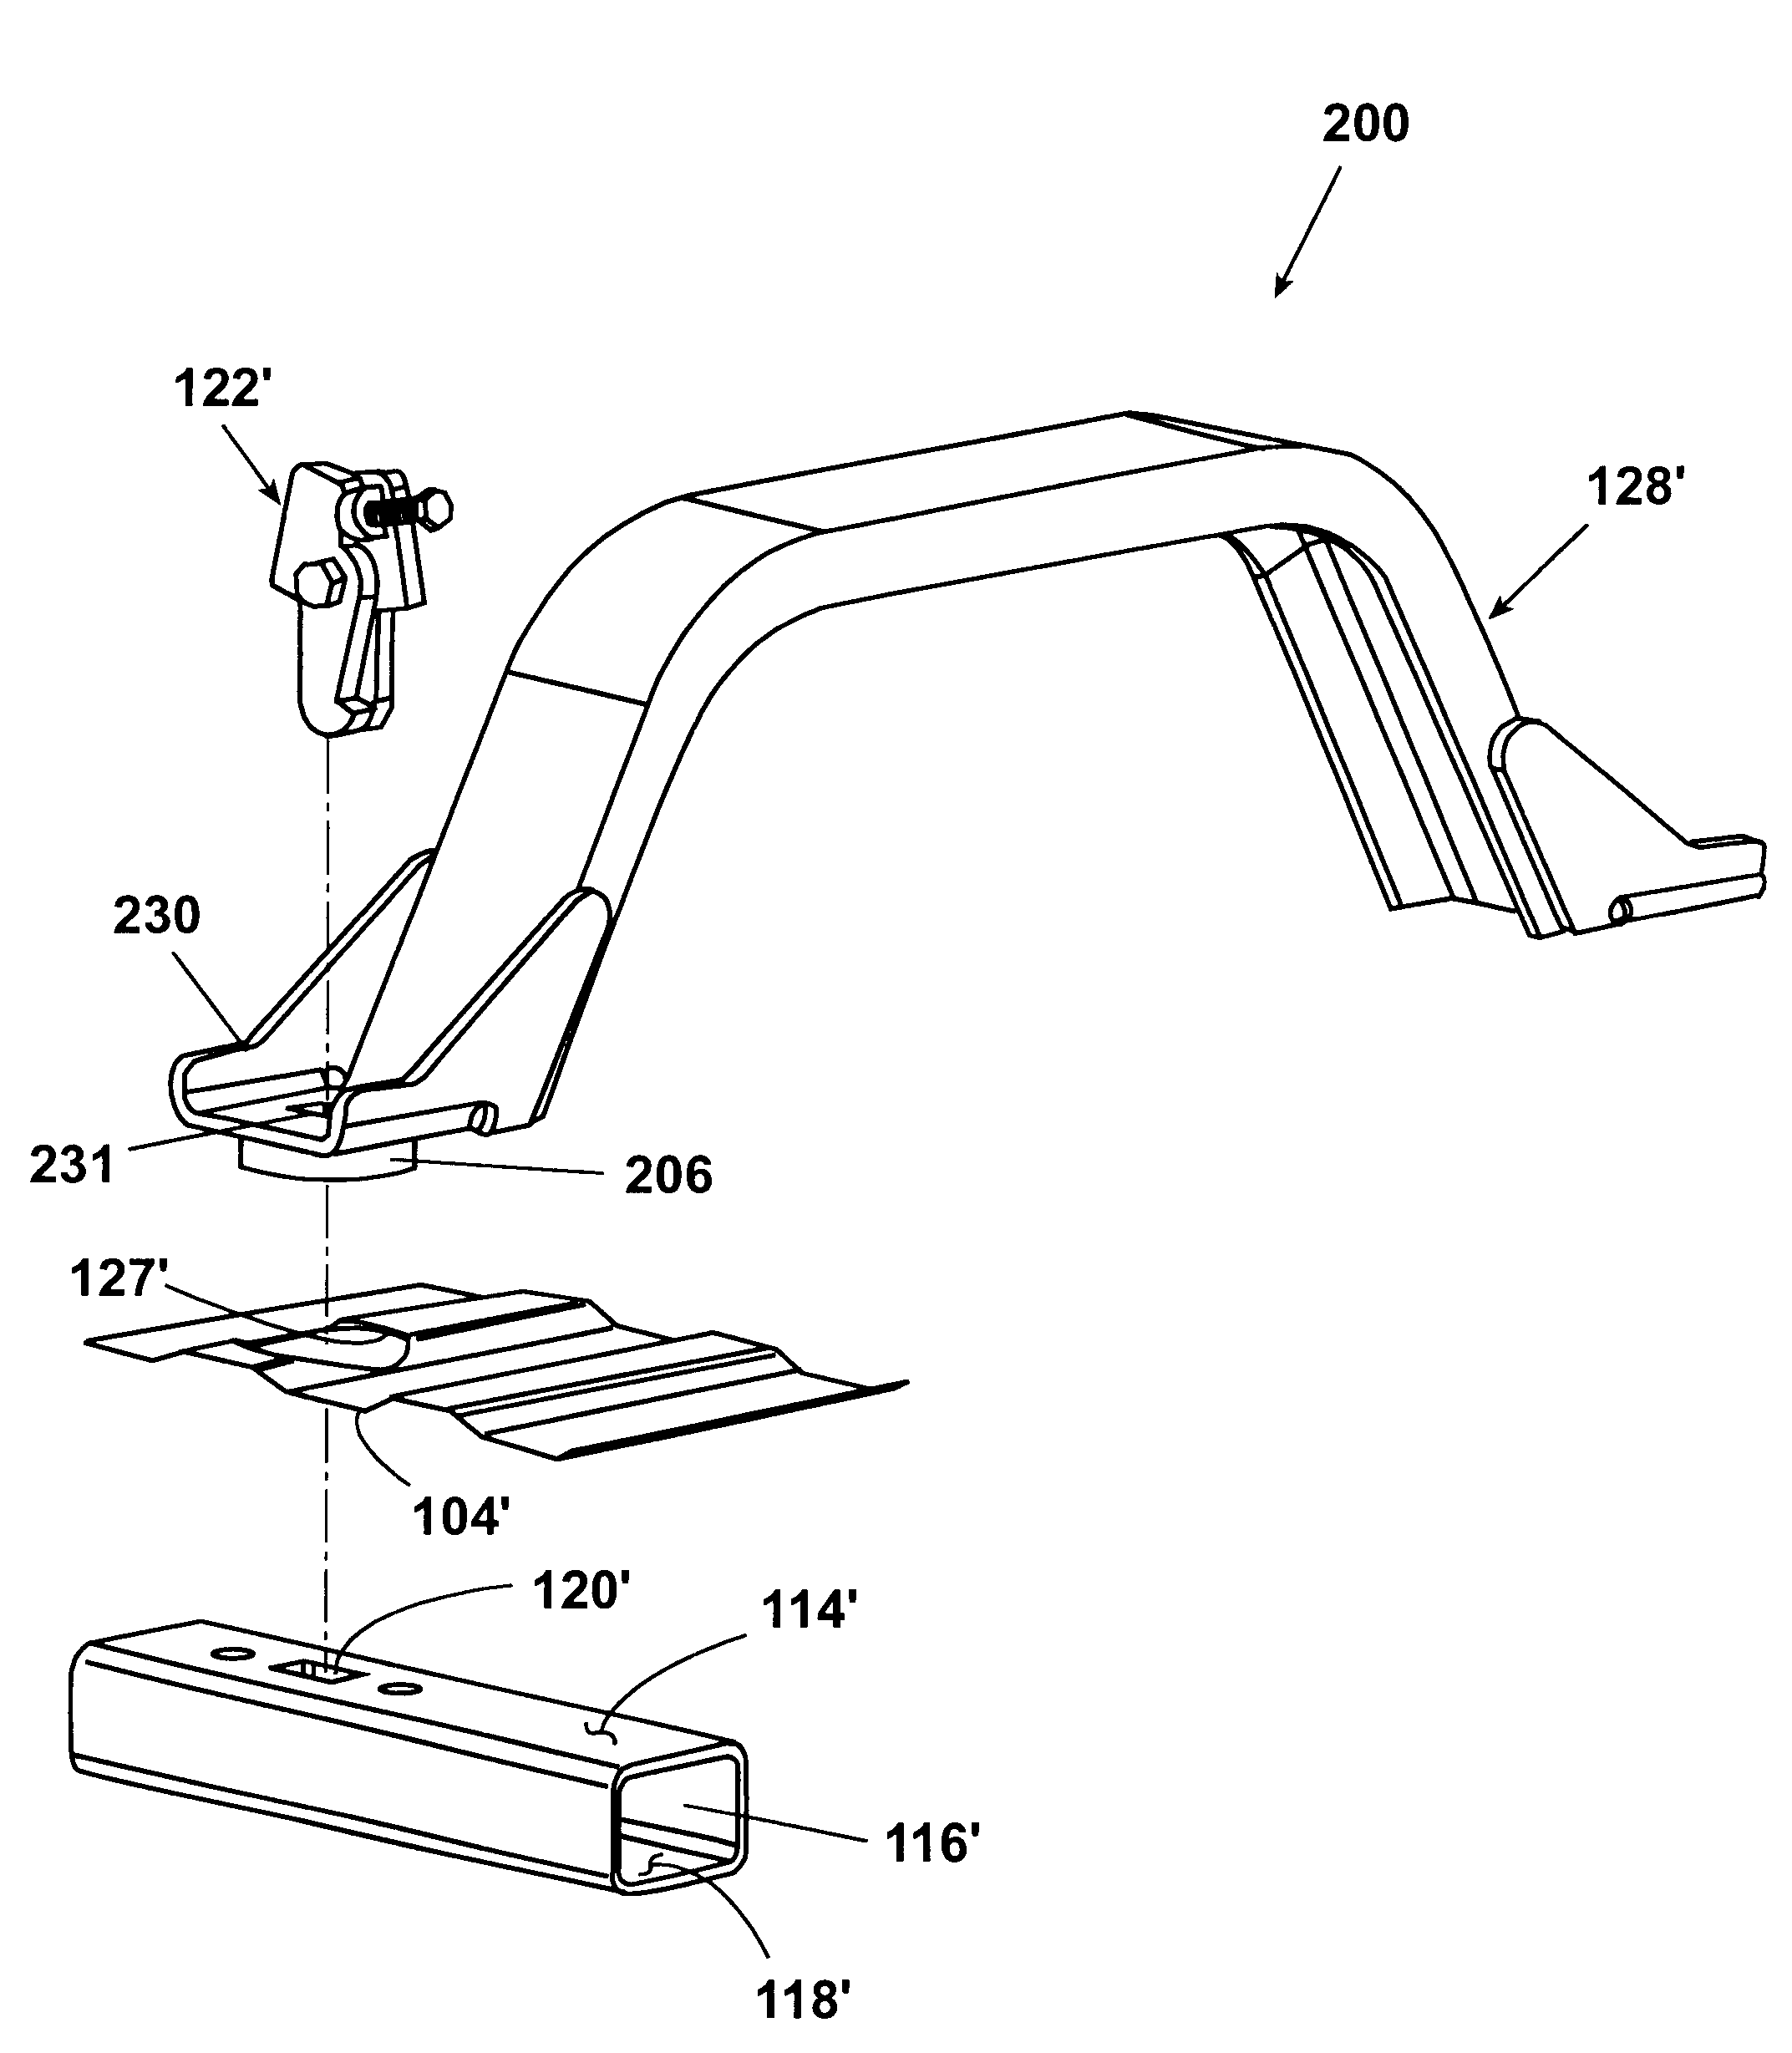 Under-bed fifth wheel mounting system